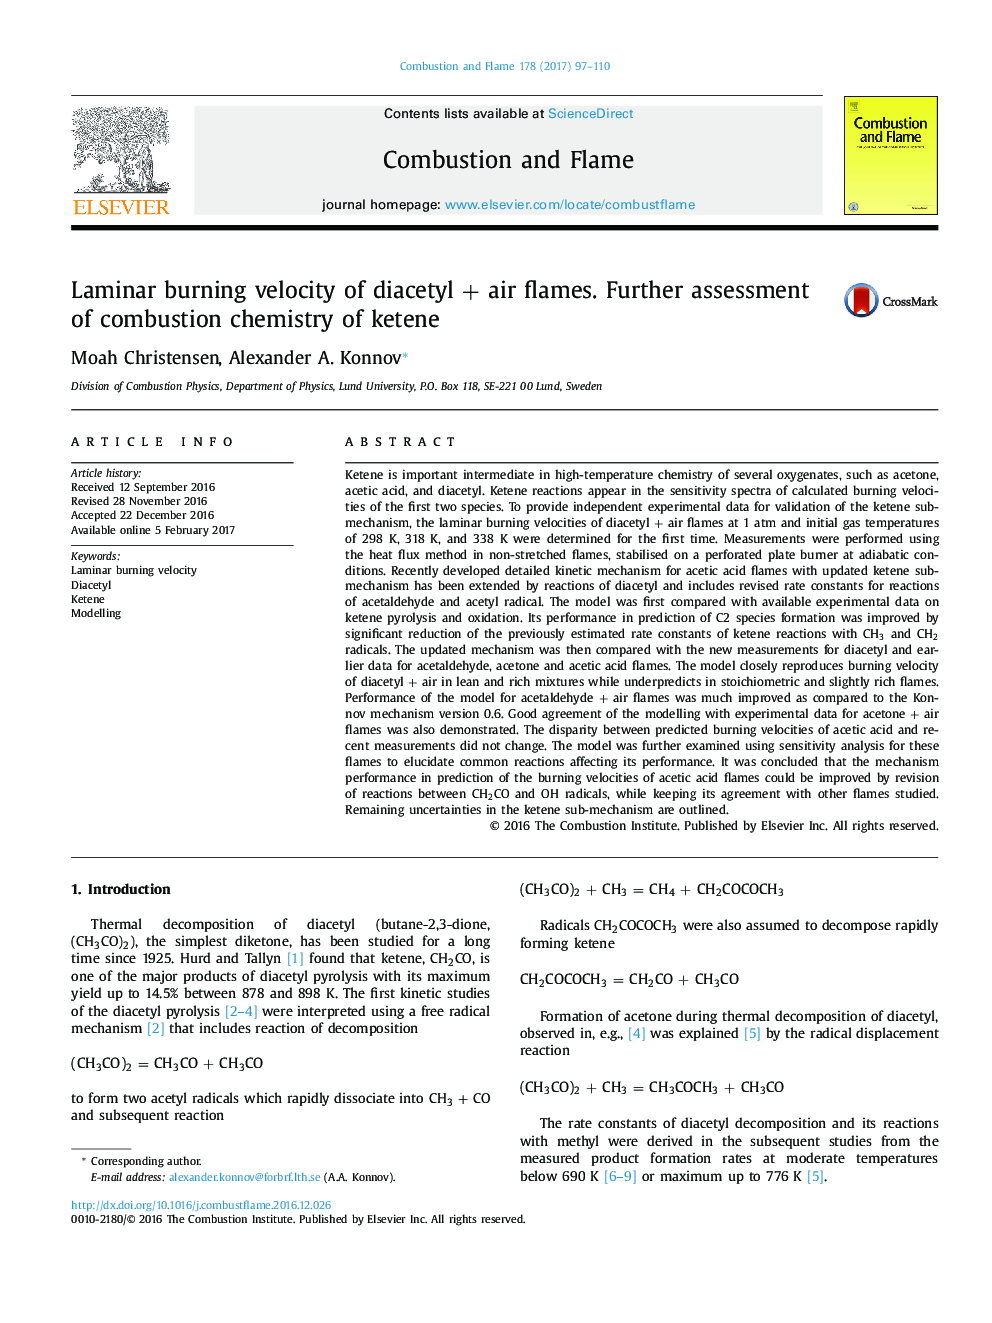 Laminar burning velocity of diacetylÂ +Â air flames. Further assessment of combustion chemistry of ketene